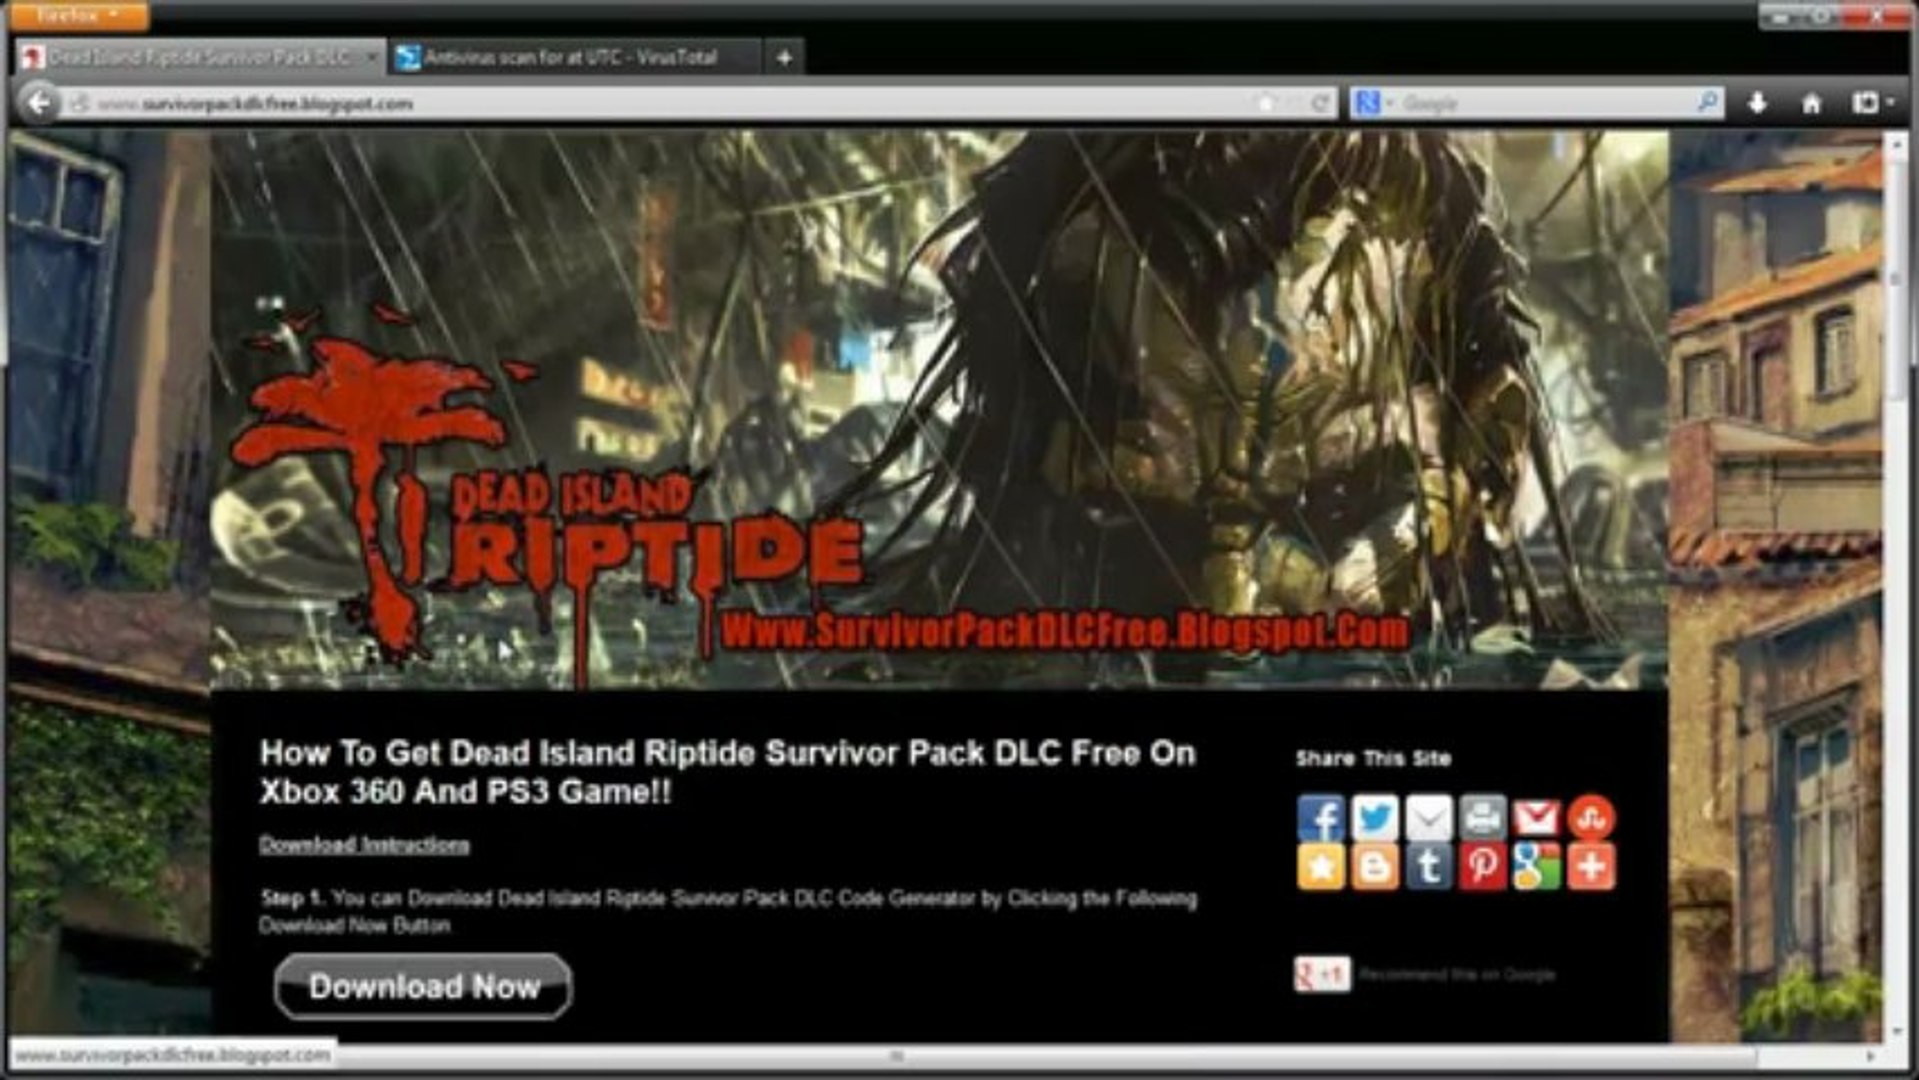 Dead Island Riptide Survivor Pack DLC Code Free Giveaway - video Dailymotion